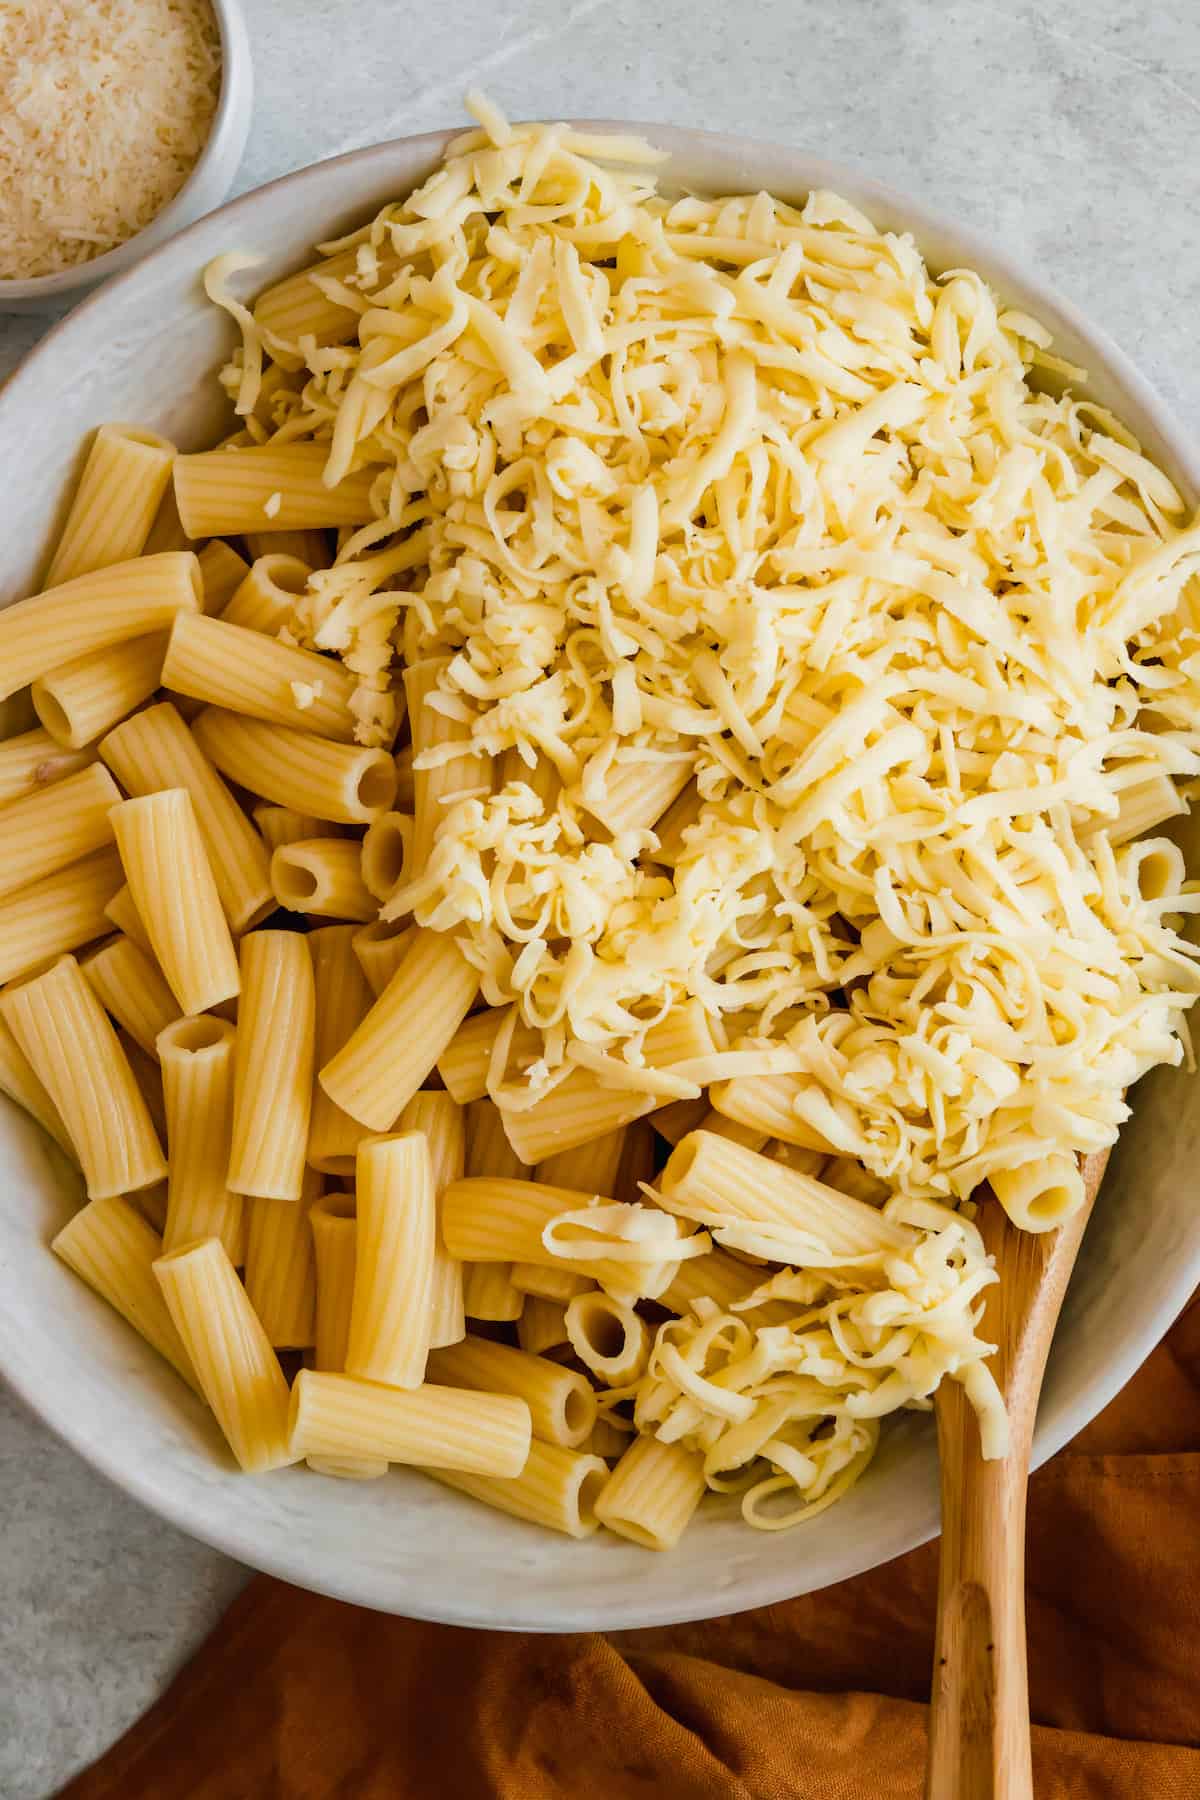 Rigatoni Noodles in a Bowl with Shredded Mozzarella Cheese